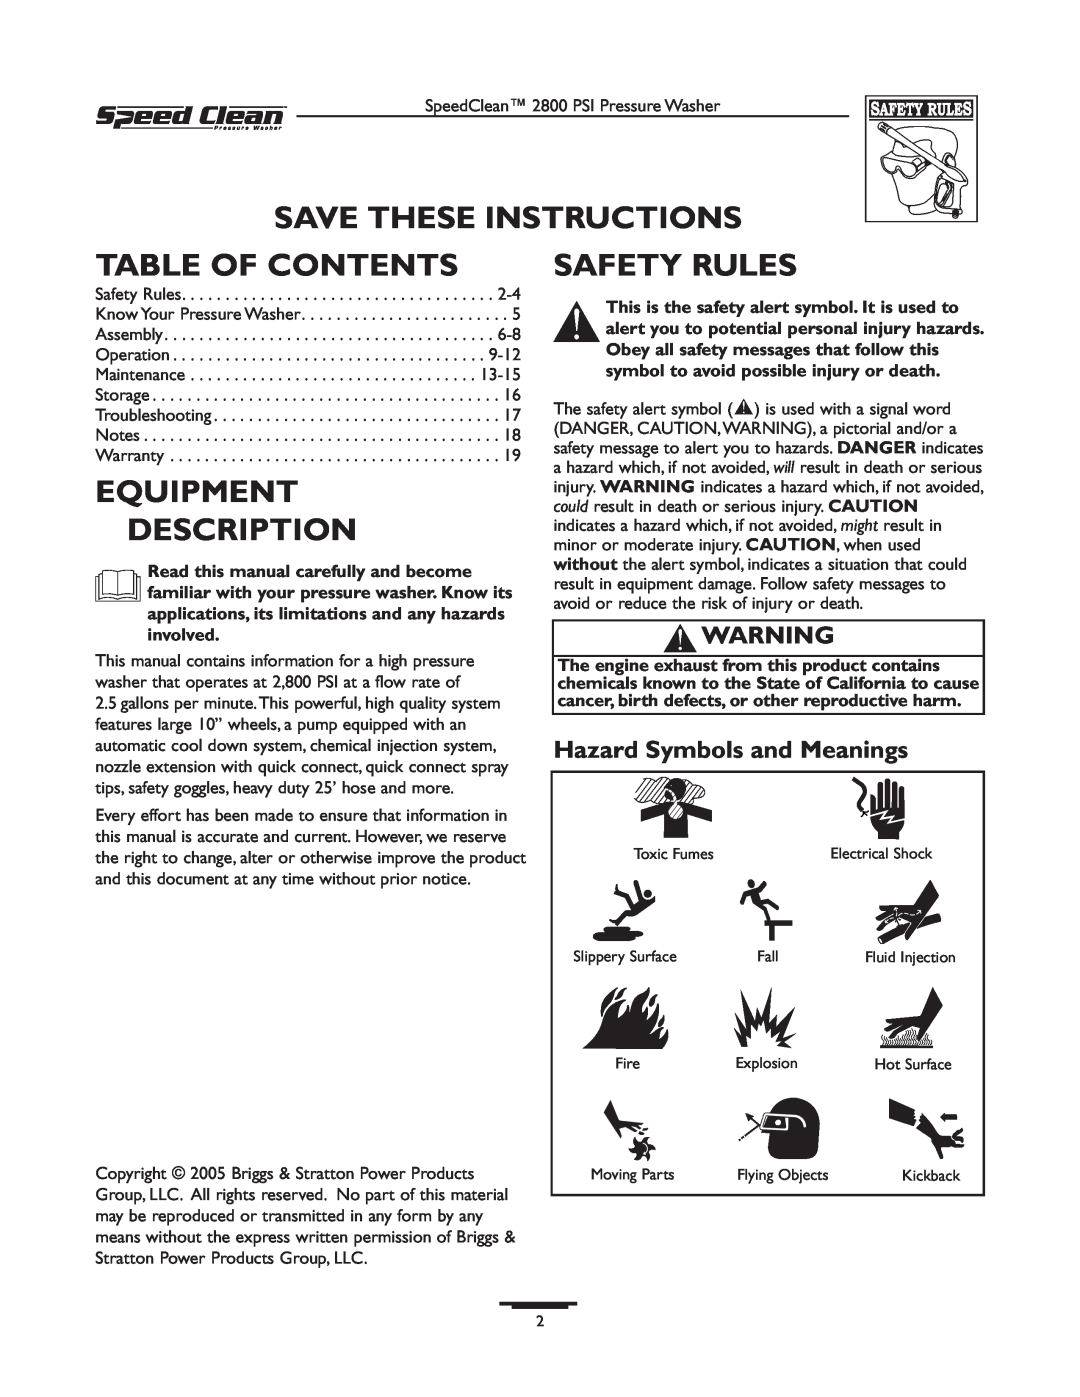 Briggs & Stratton 020212-0 owner manual Save These Instructions, Table Of Contents, Equipment Description, Safety Rules 